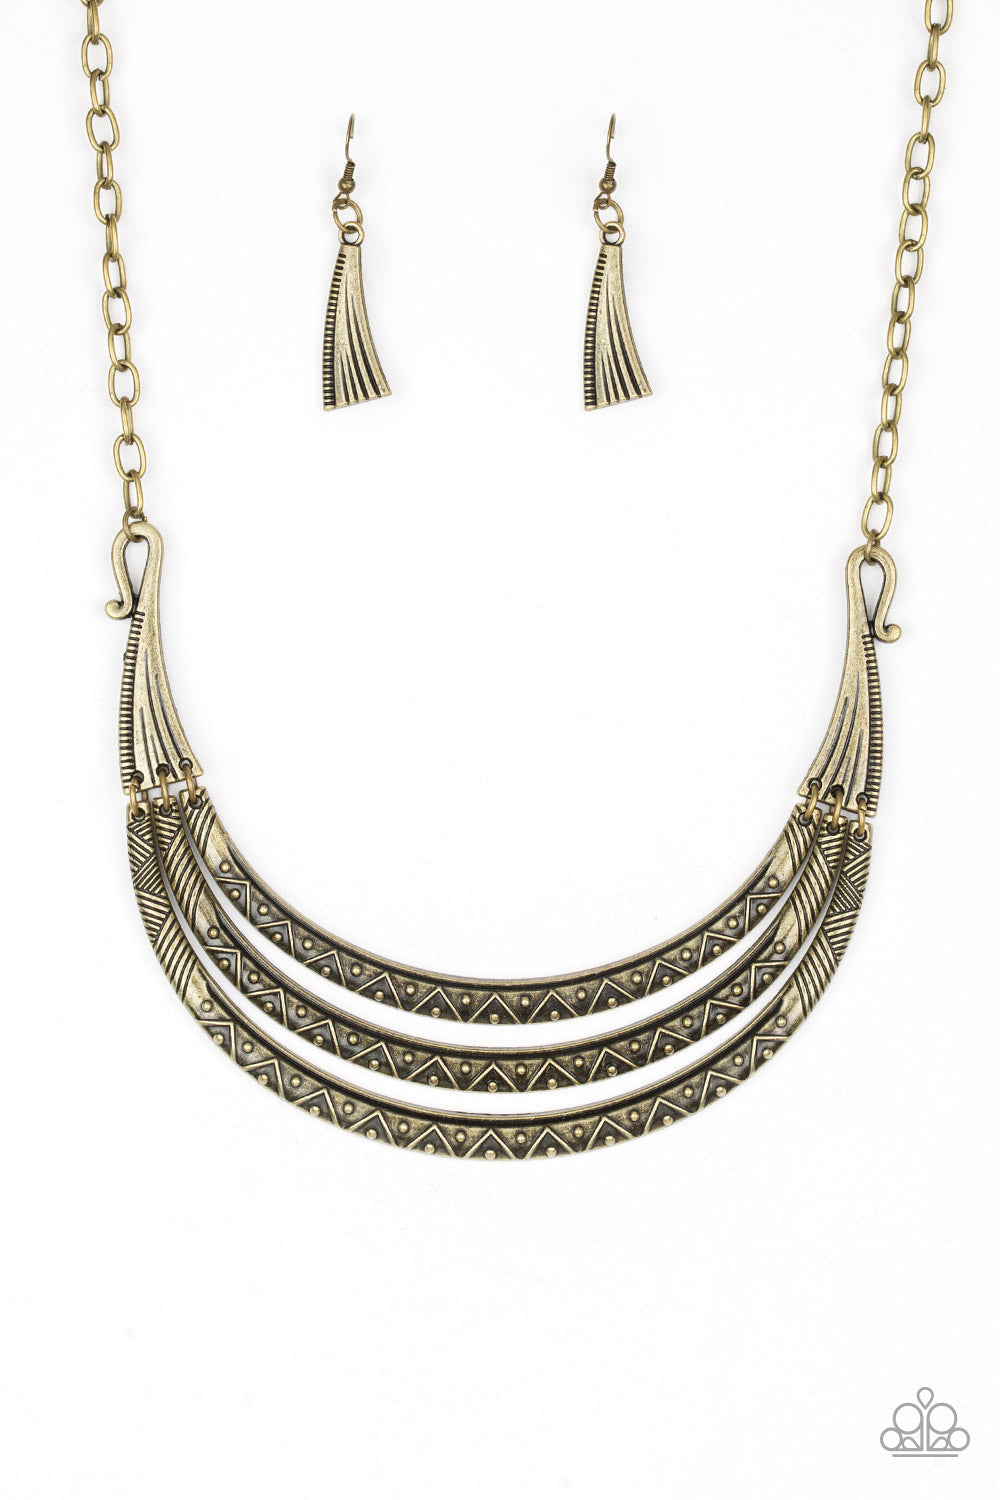 Primal Princess - Brass Fashion Necklace - Paparazzi Accessories - Embossed in zigzagging patterns brass crescents swing from two brass plates for a tribal stylish look. Dotted with studded textures the antiqued pendants stack below the collar for a bold indigenous finish. Features an adjustable clasp closure.